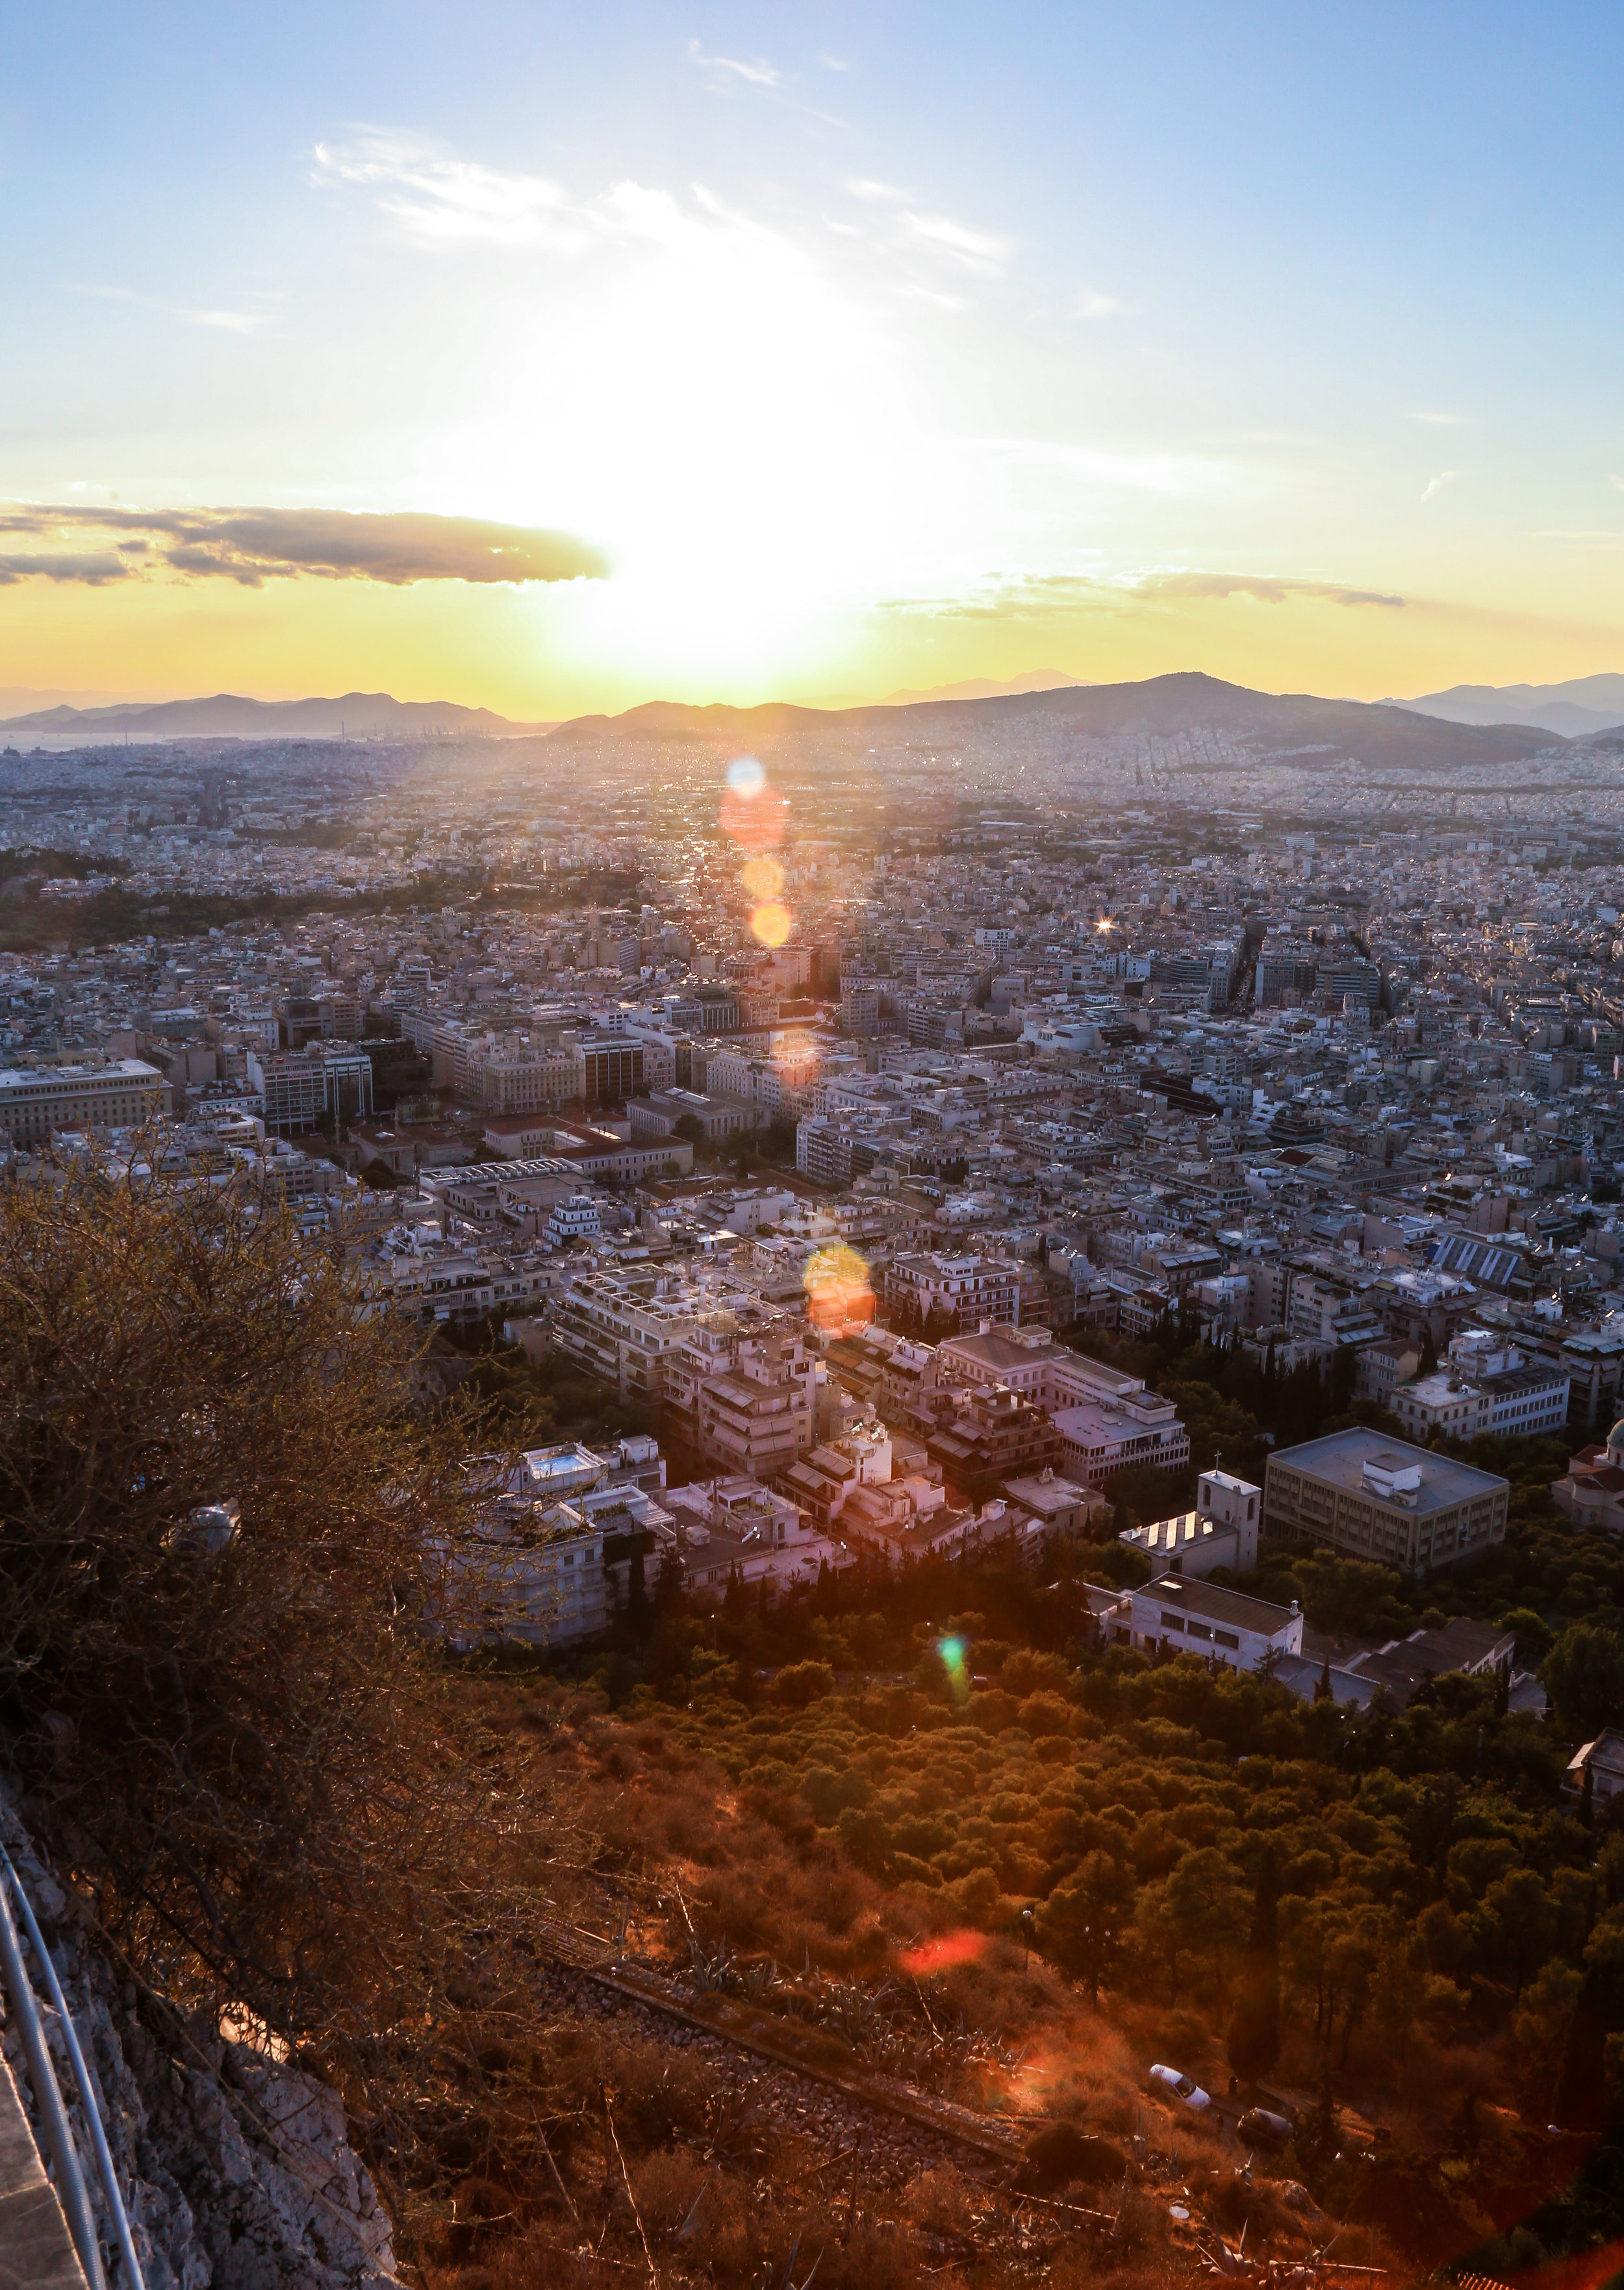  The summit of Lycabettus Hill. It is the highest point in Athens, sitting at around 900ft above sea level. 